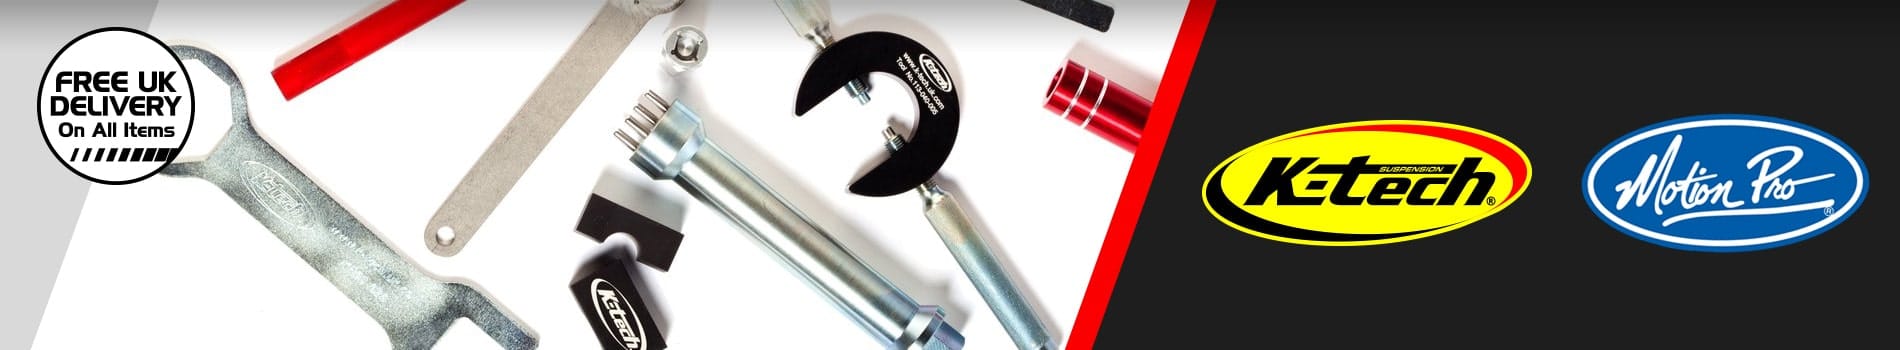 Shock Absorber Tools - Free UK Delivery